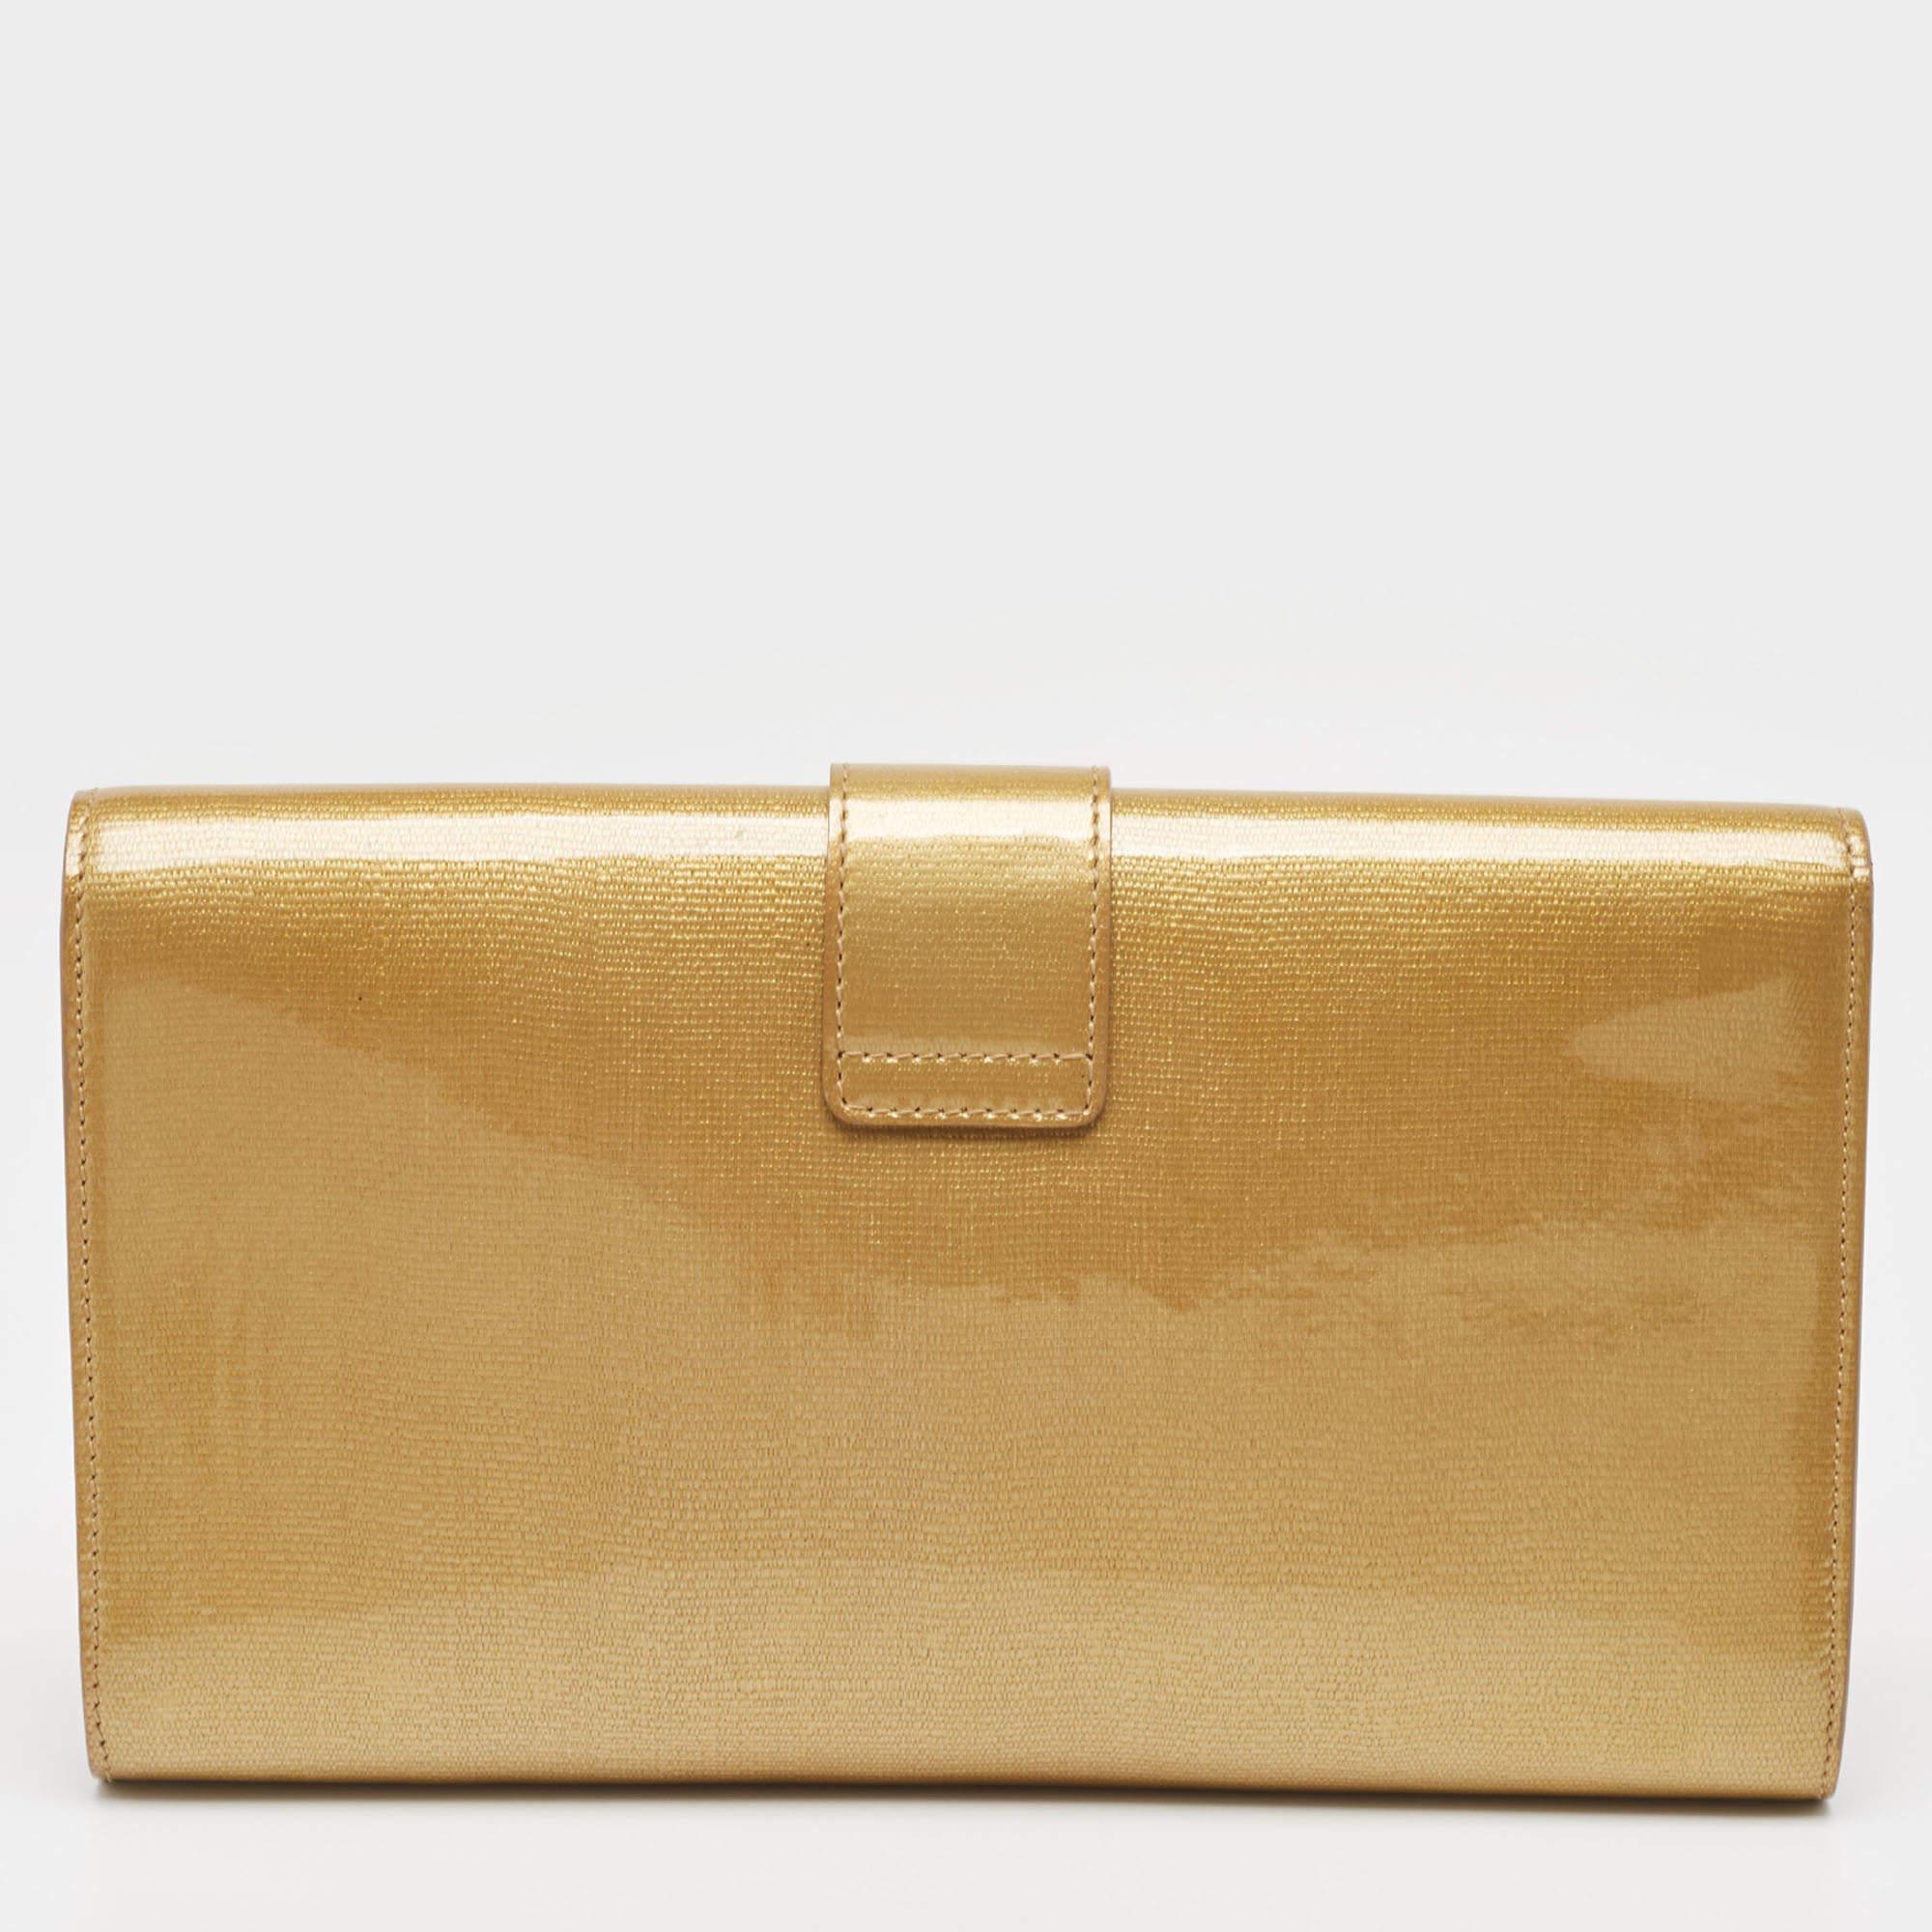 Yves Saint Laurent Gold Leather Large Chyc Clutch 2